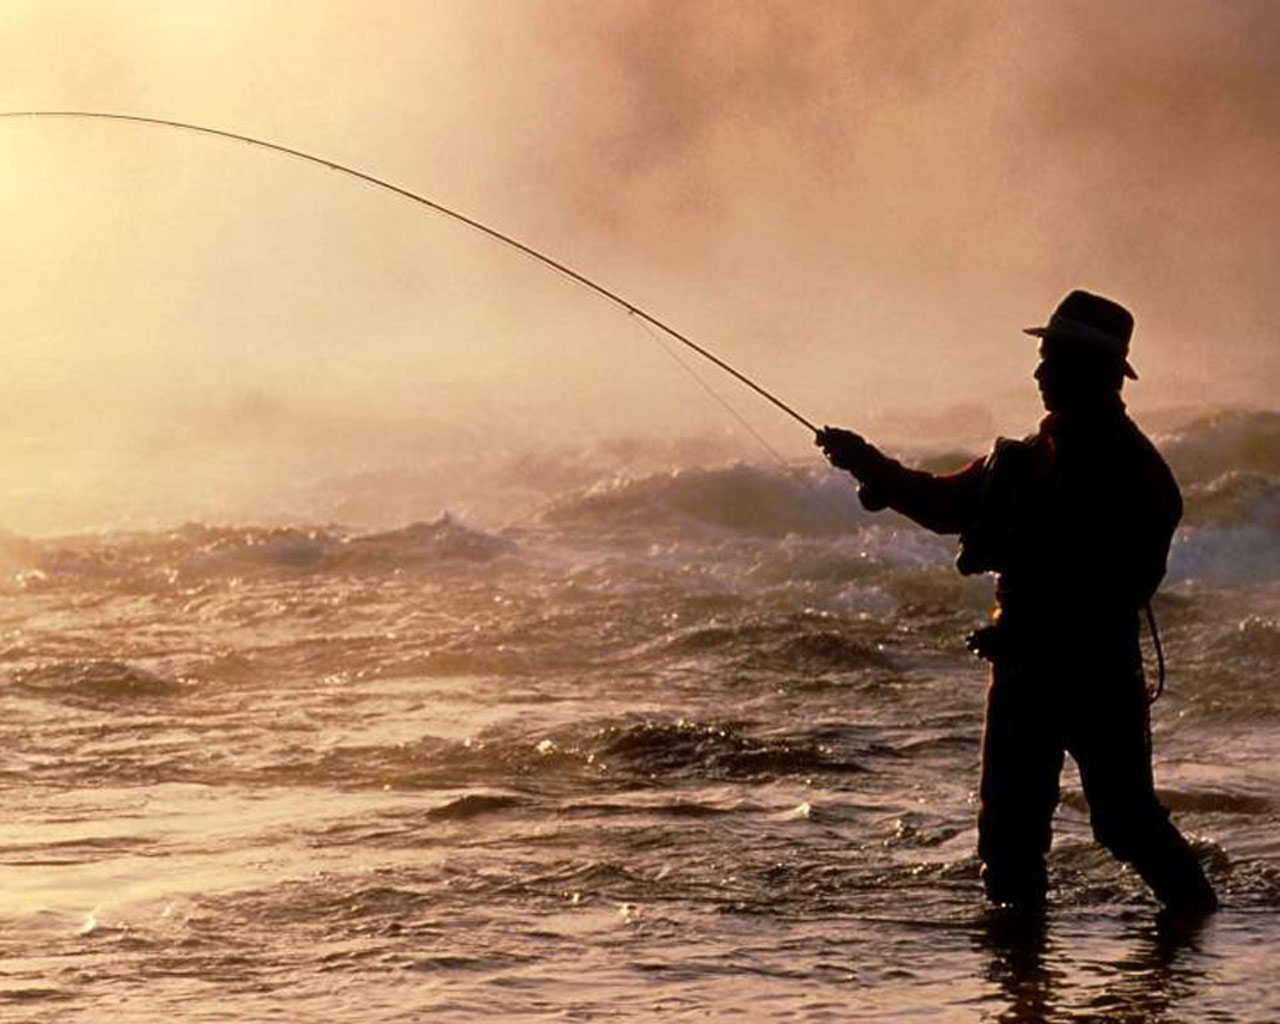 Fisherman wallpapers, Photography, HQ Fisherman pictures | 4K Wallpapers  2019